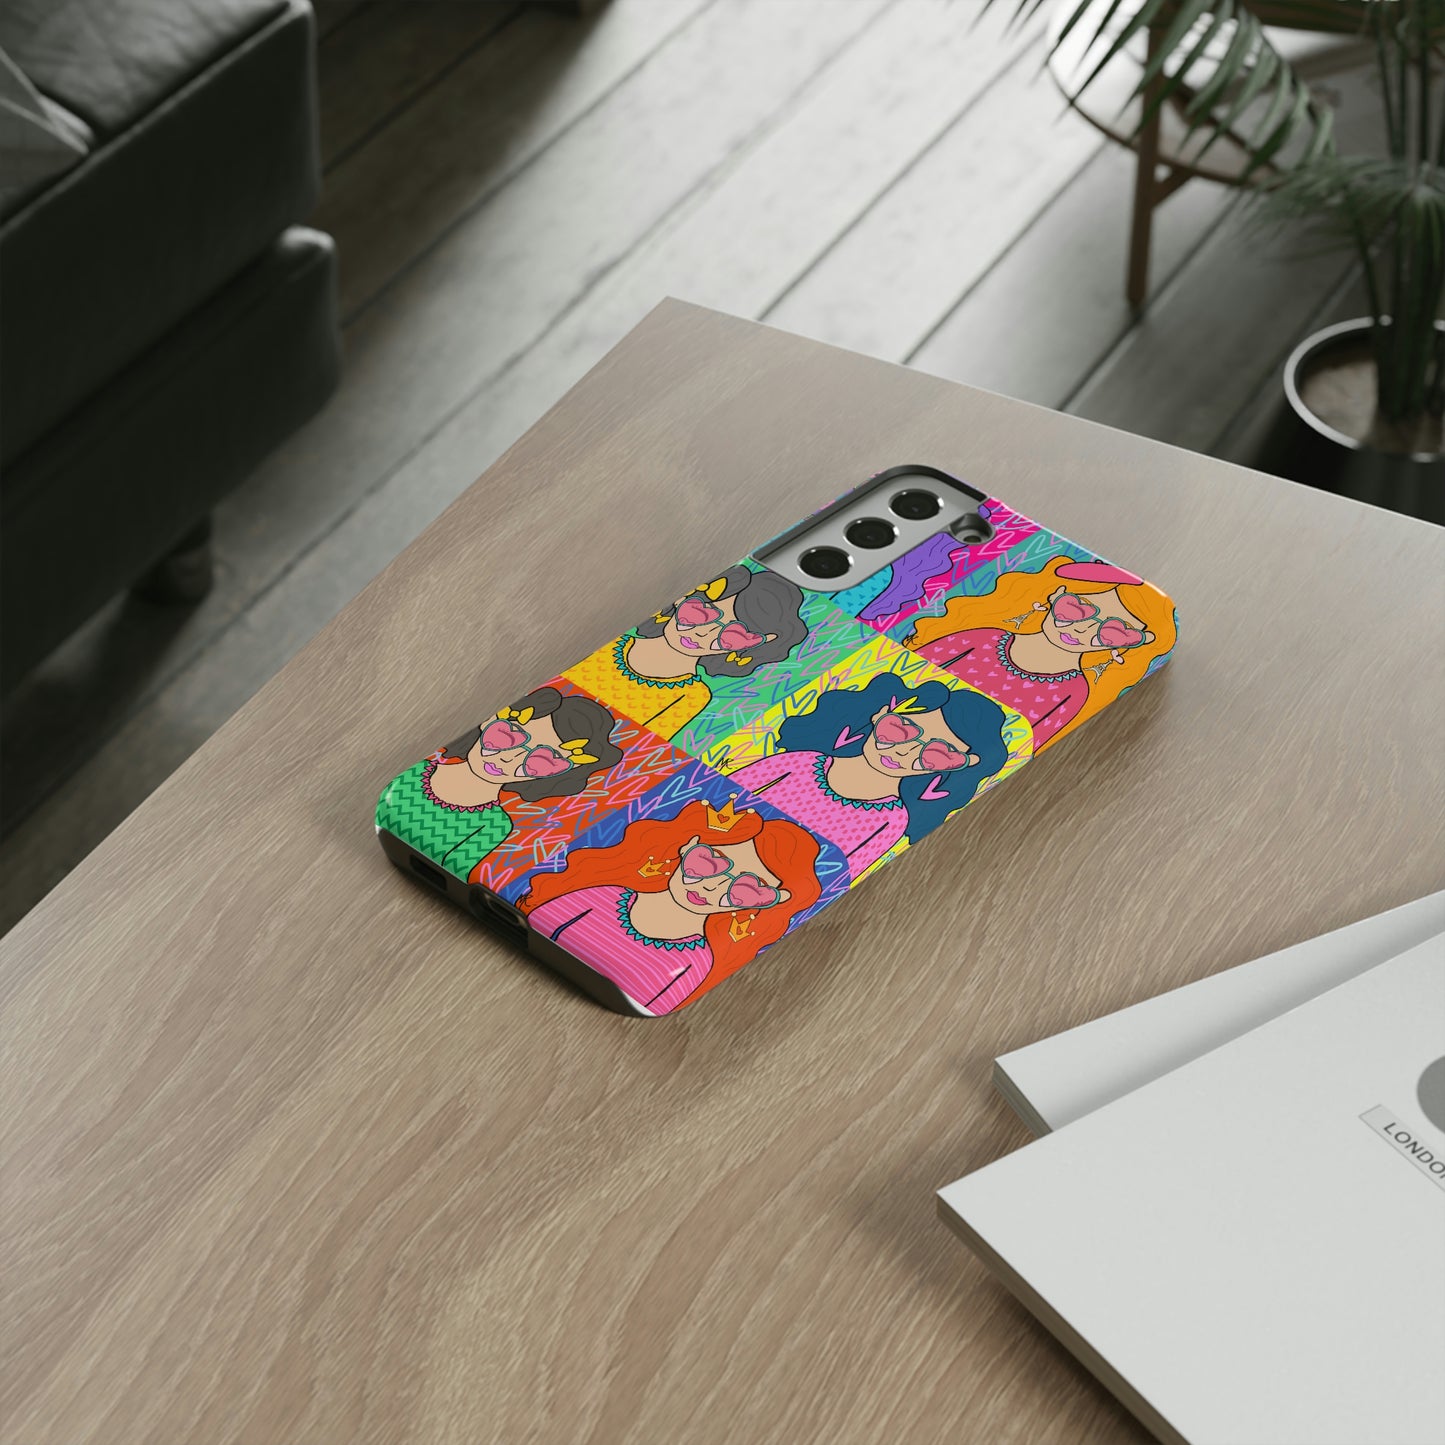 SPART Pretty and Punk dolls Colorful Cases